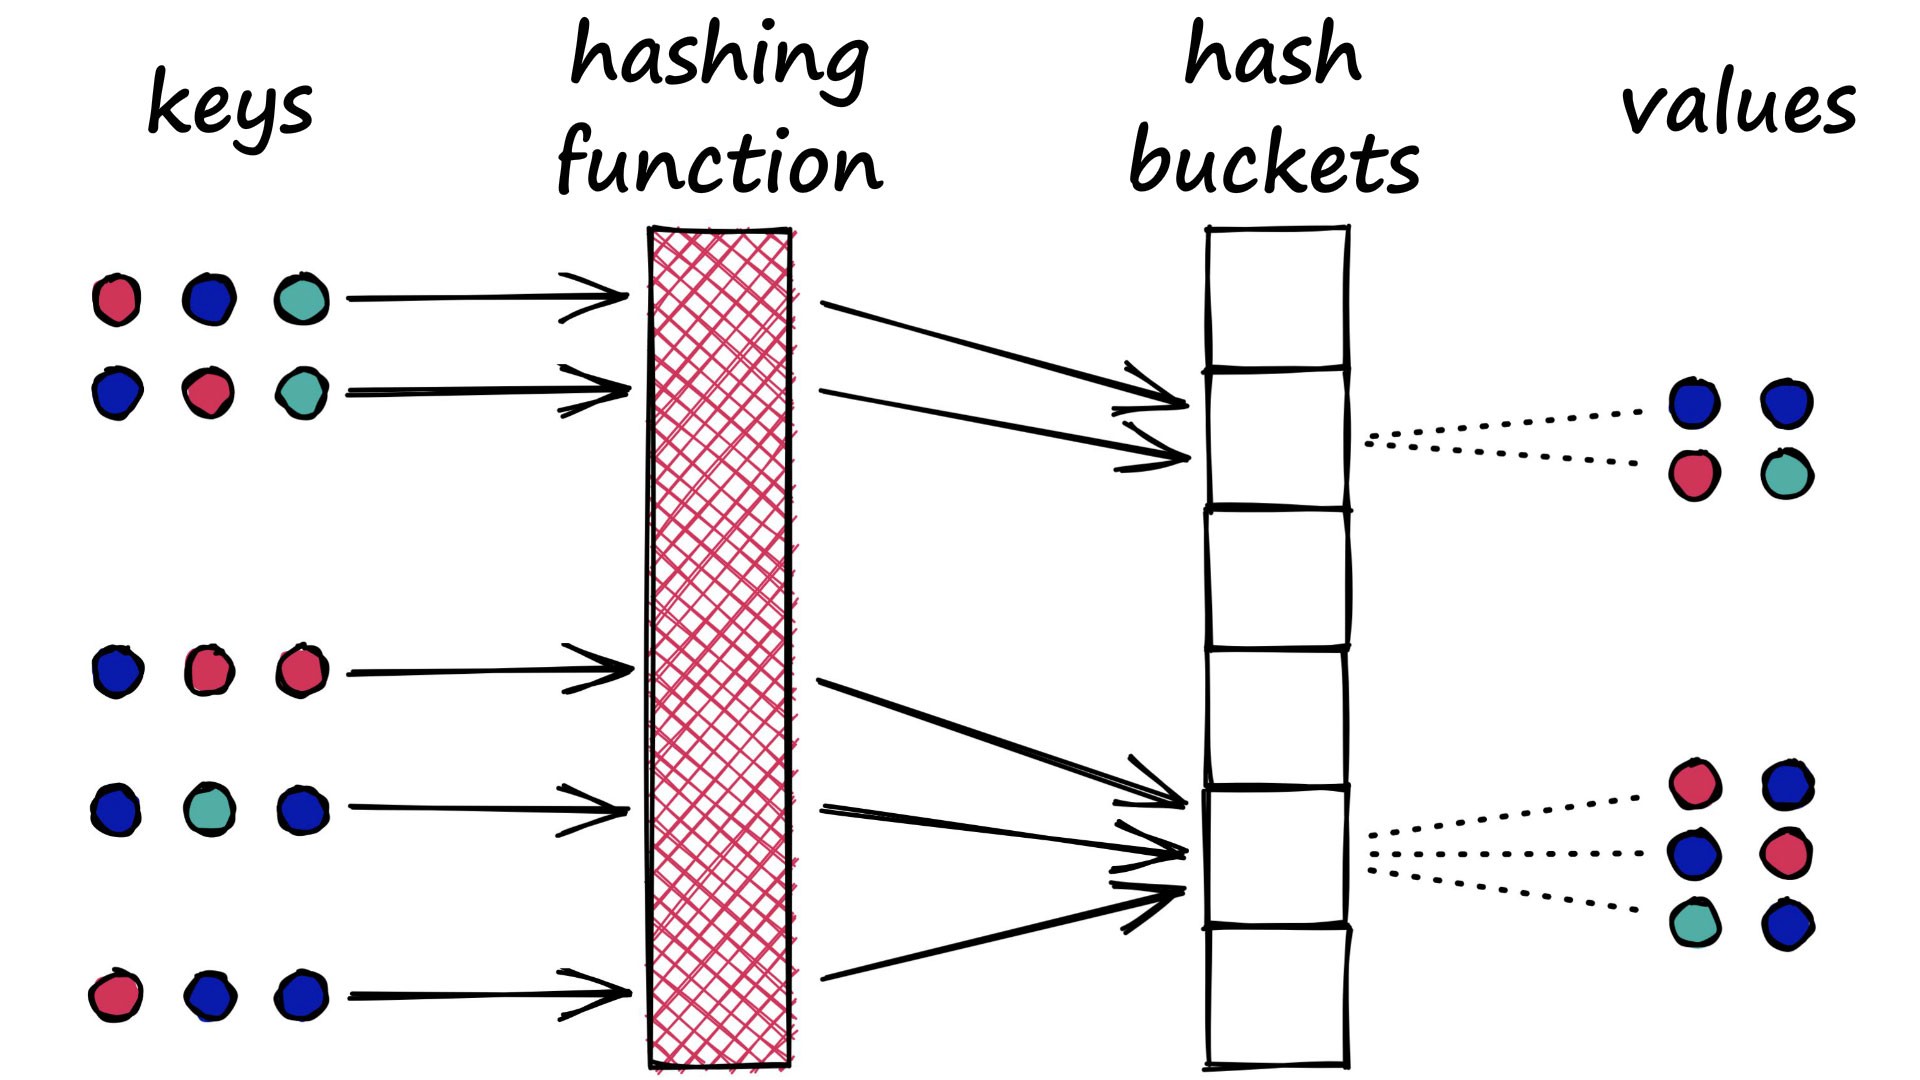 An LSH function aims to place similar values into the same buckets.